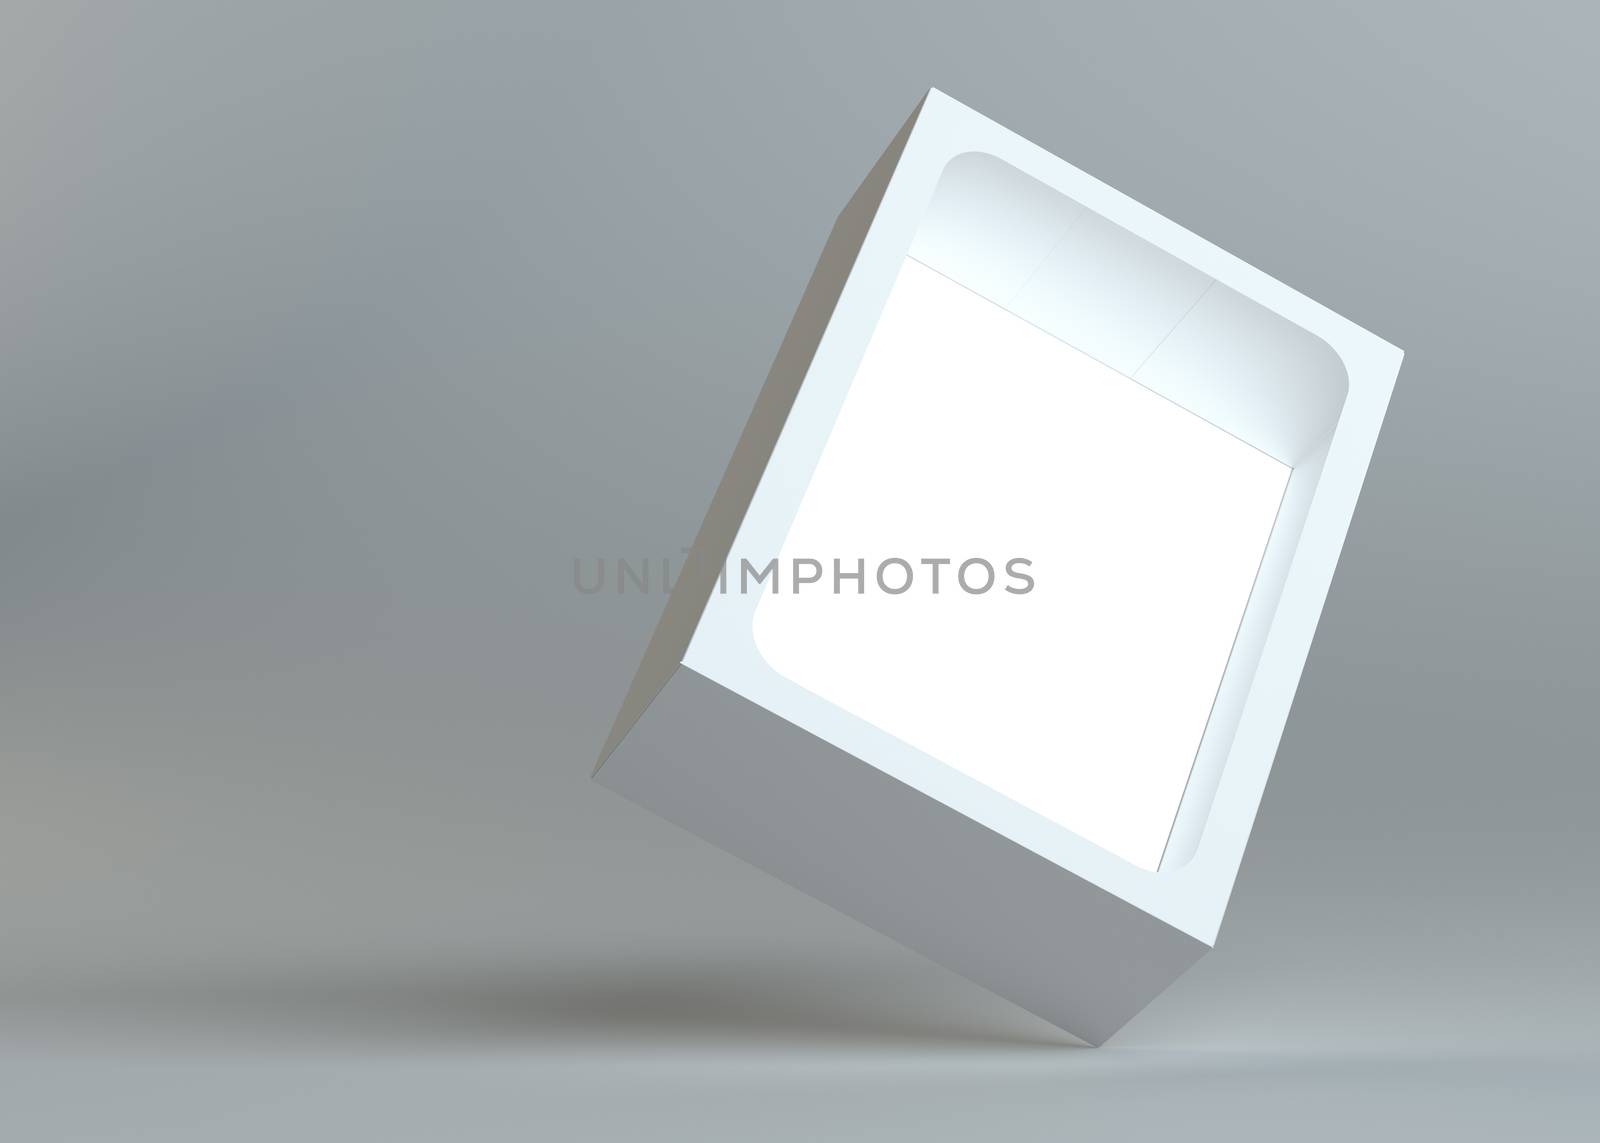 A realistic white empty packaging cardboard box for products - cosmetics, electronics, food, books and more. Gray background. 3d illustration